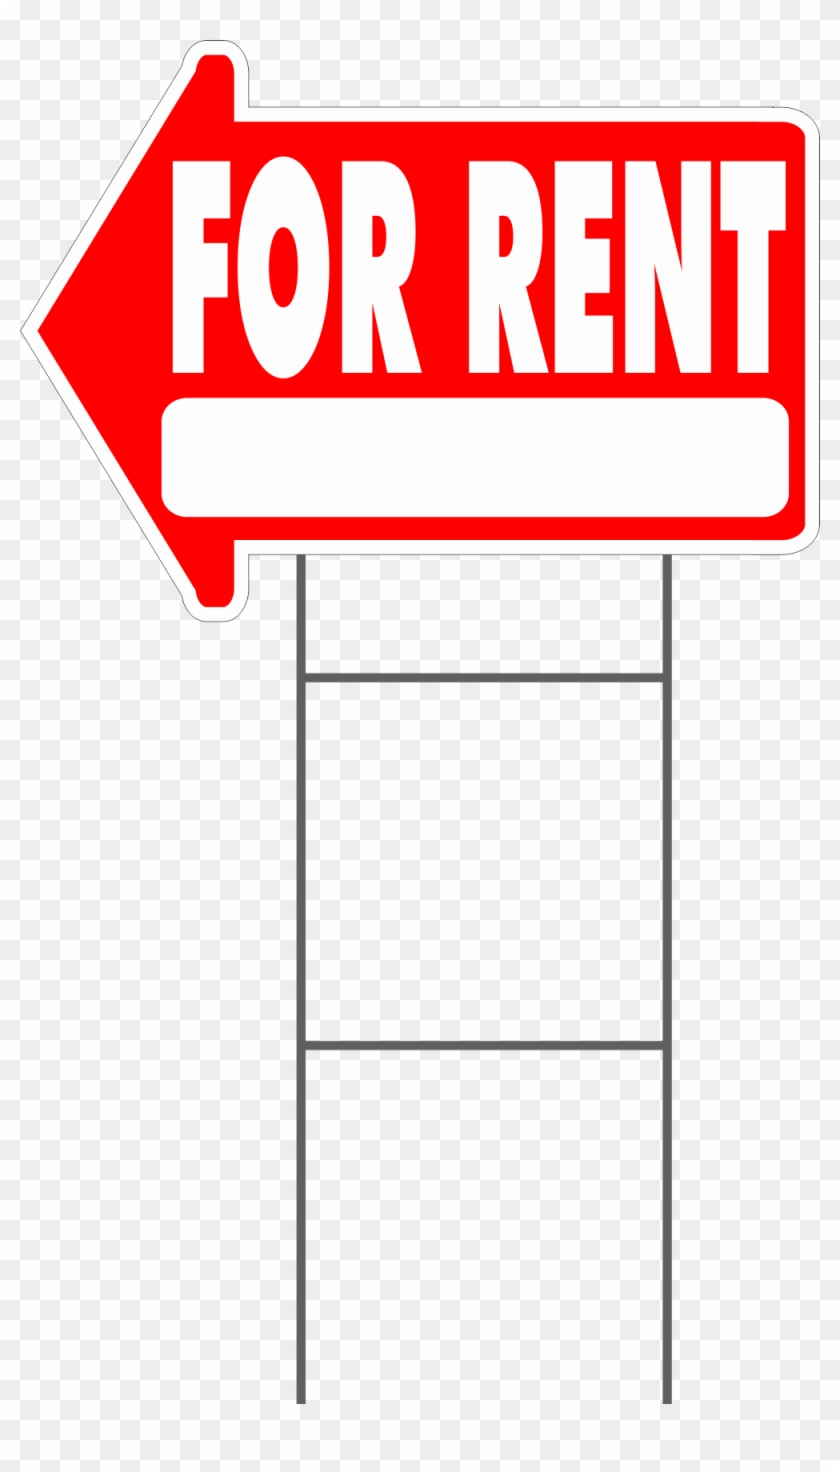 For Rent Yard Sign Arrow Shaped With Frame Statrting - Sign Clipart #5198224